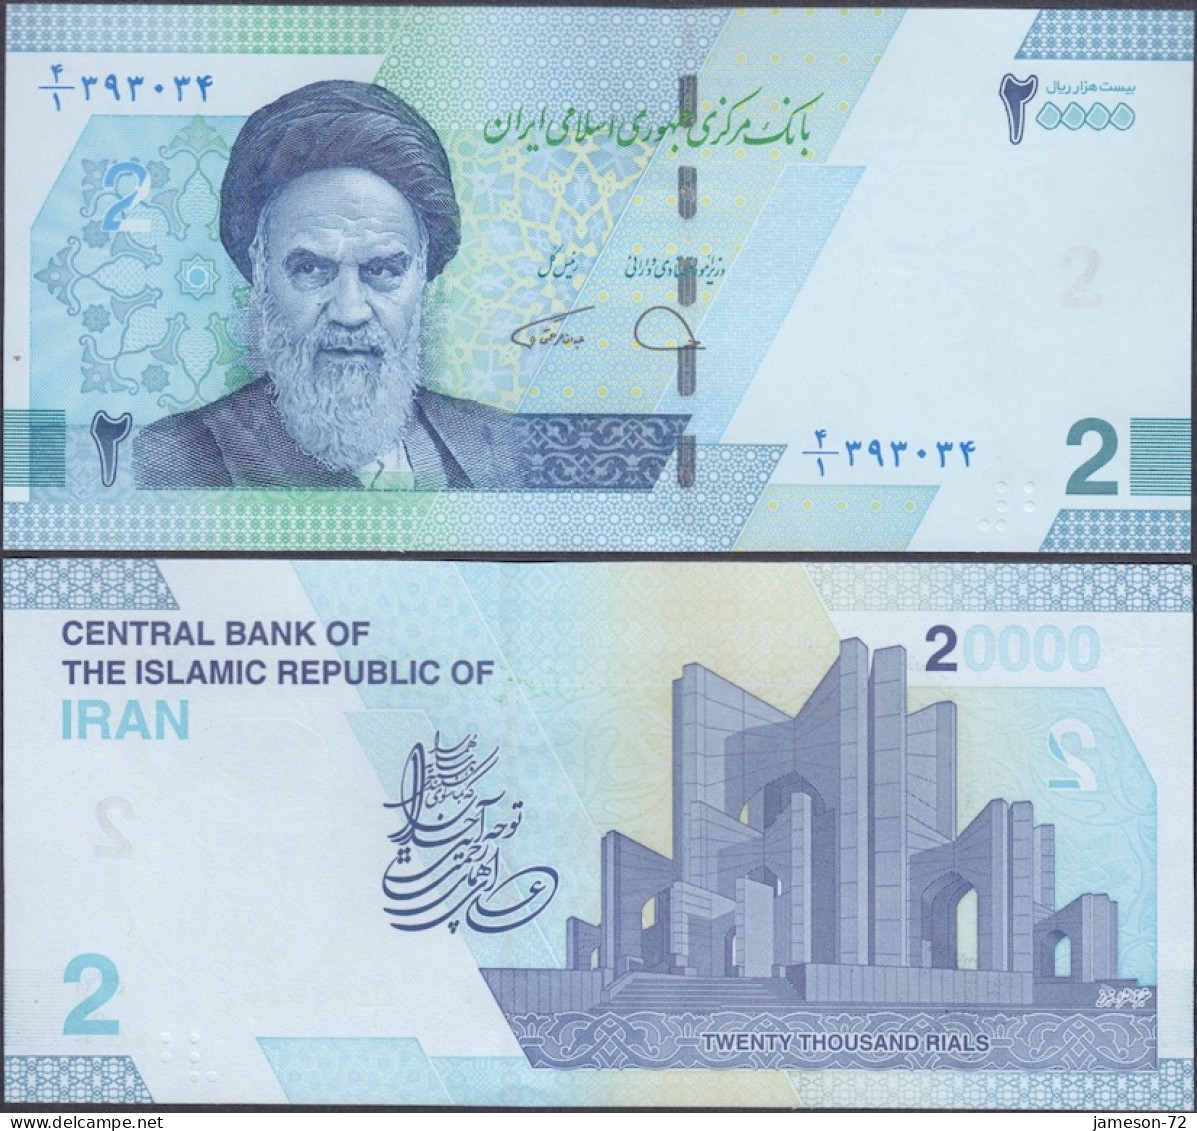 IRAN - 2 Tomans / 20000 Rials ND (2022) TBB# 299 Middle East Banknote - Edelweiss Coins - Irán